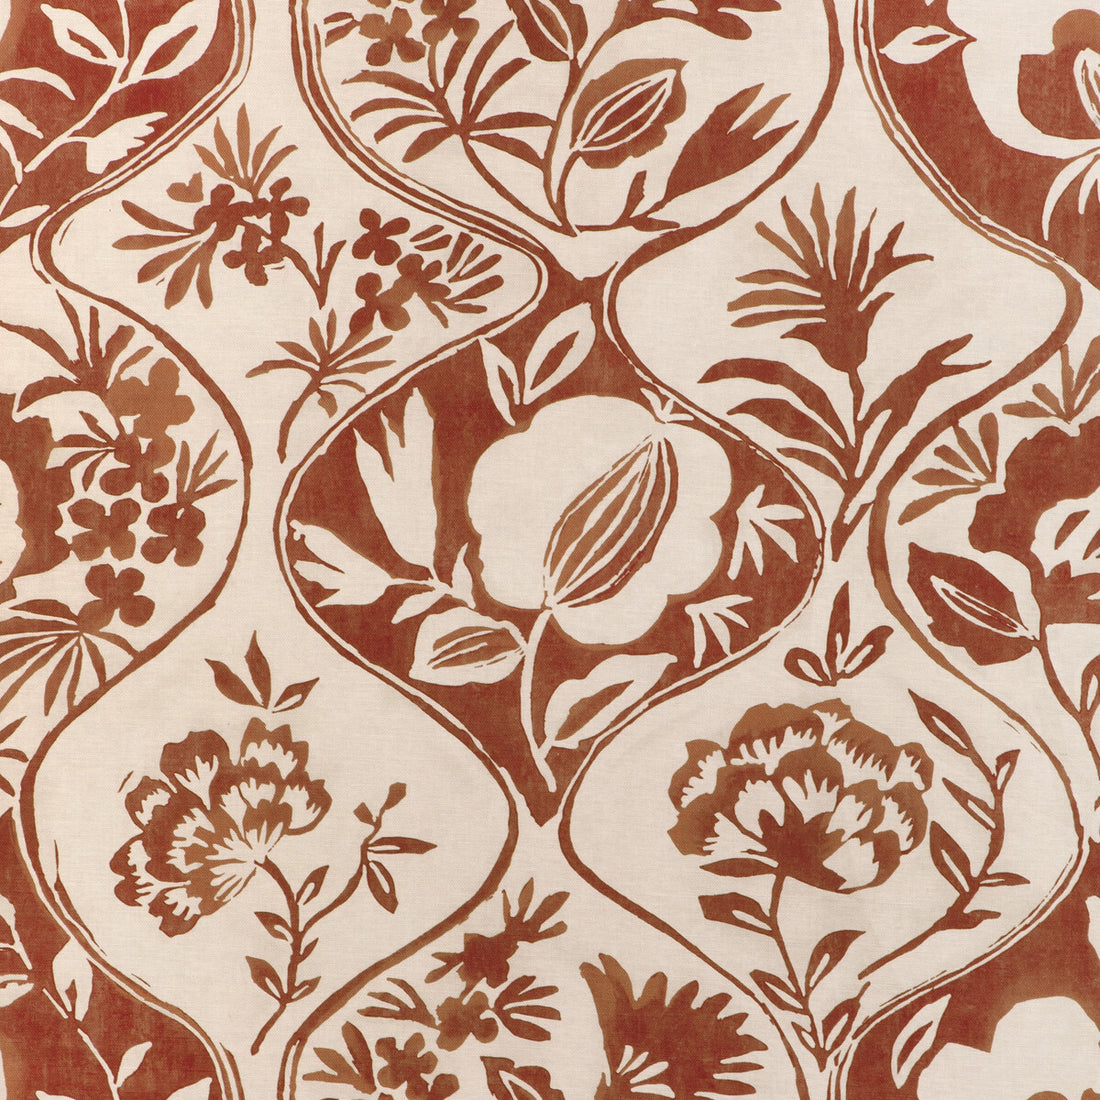 Calathea Print fabric in clay color - pattern 2023141.24.0 - by Lee Jofa in the Garden Walk collection